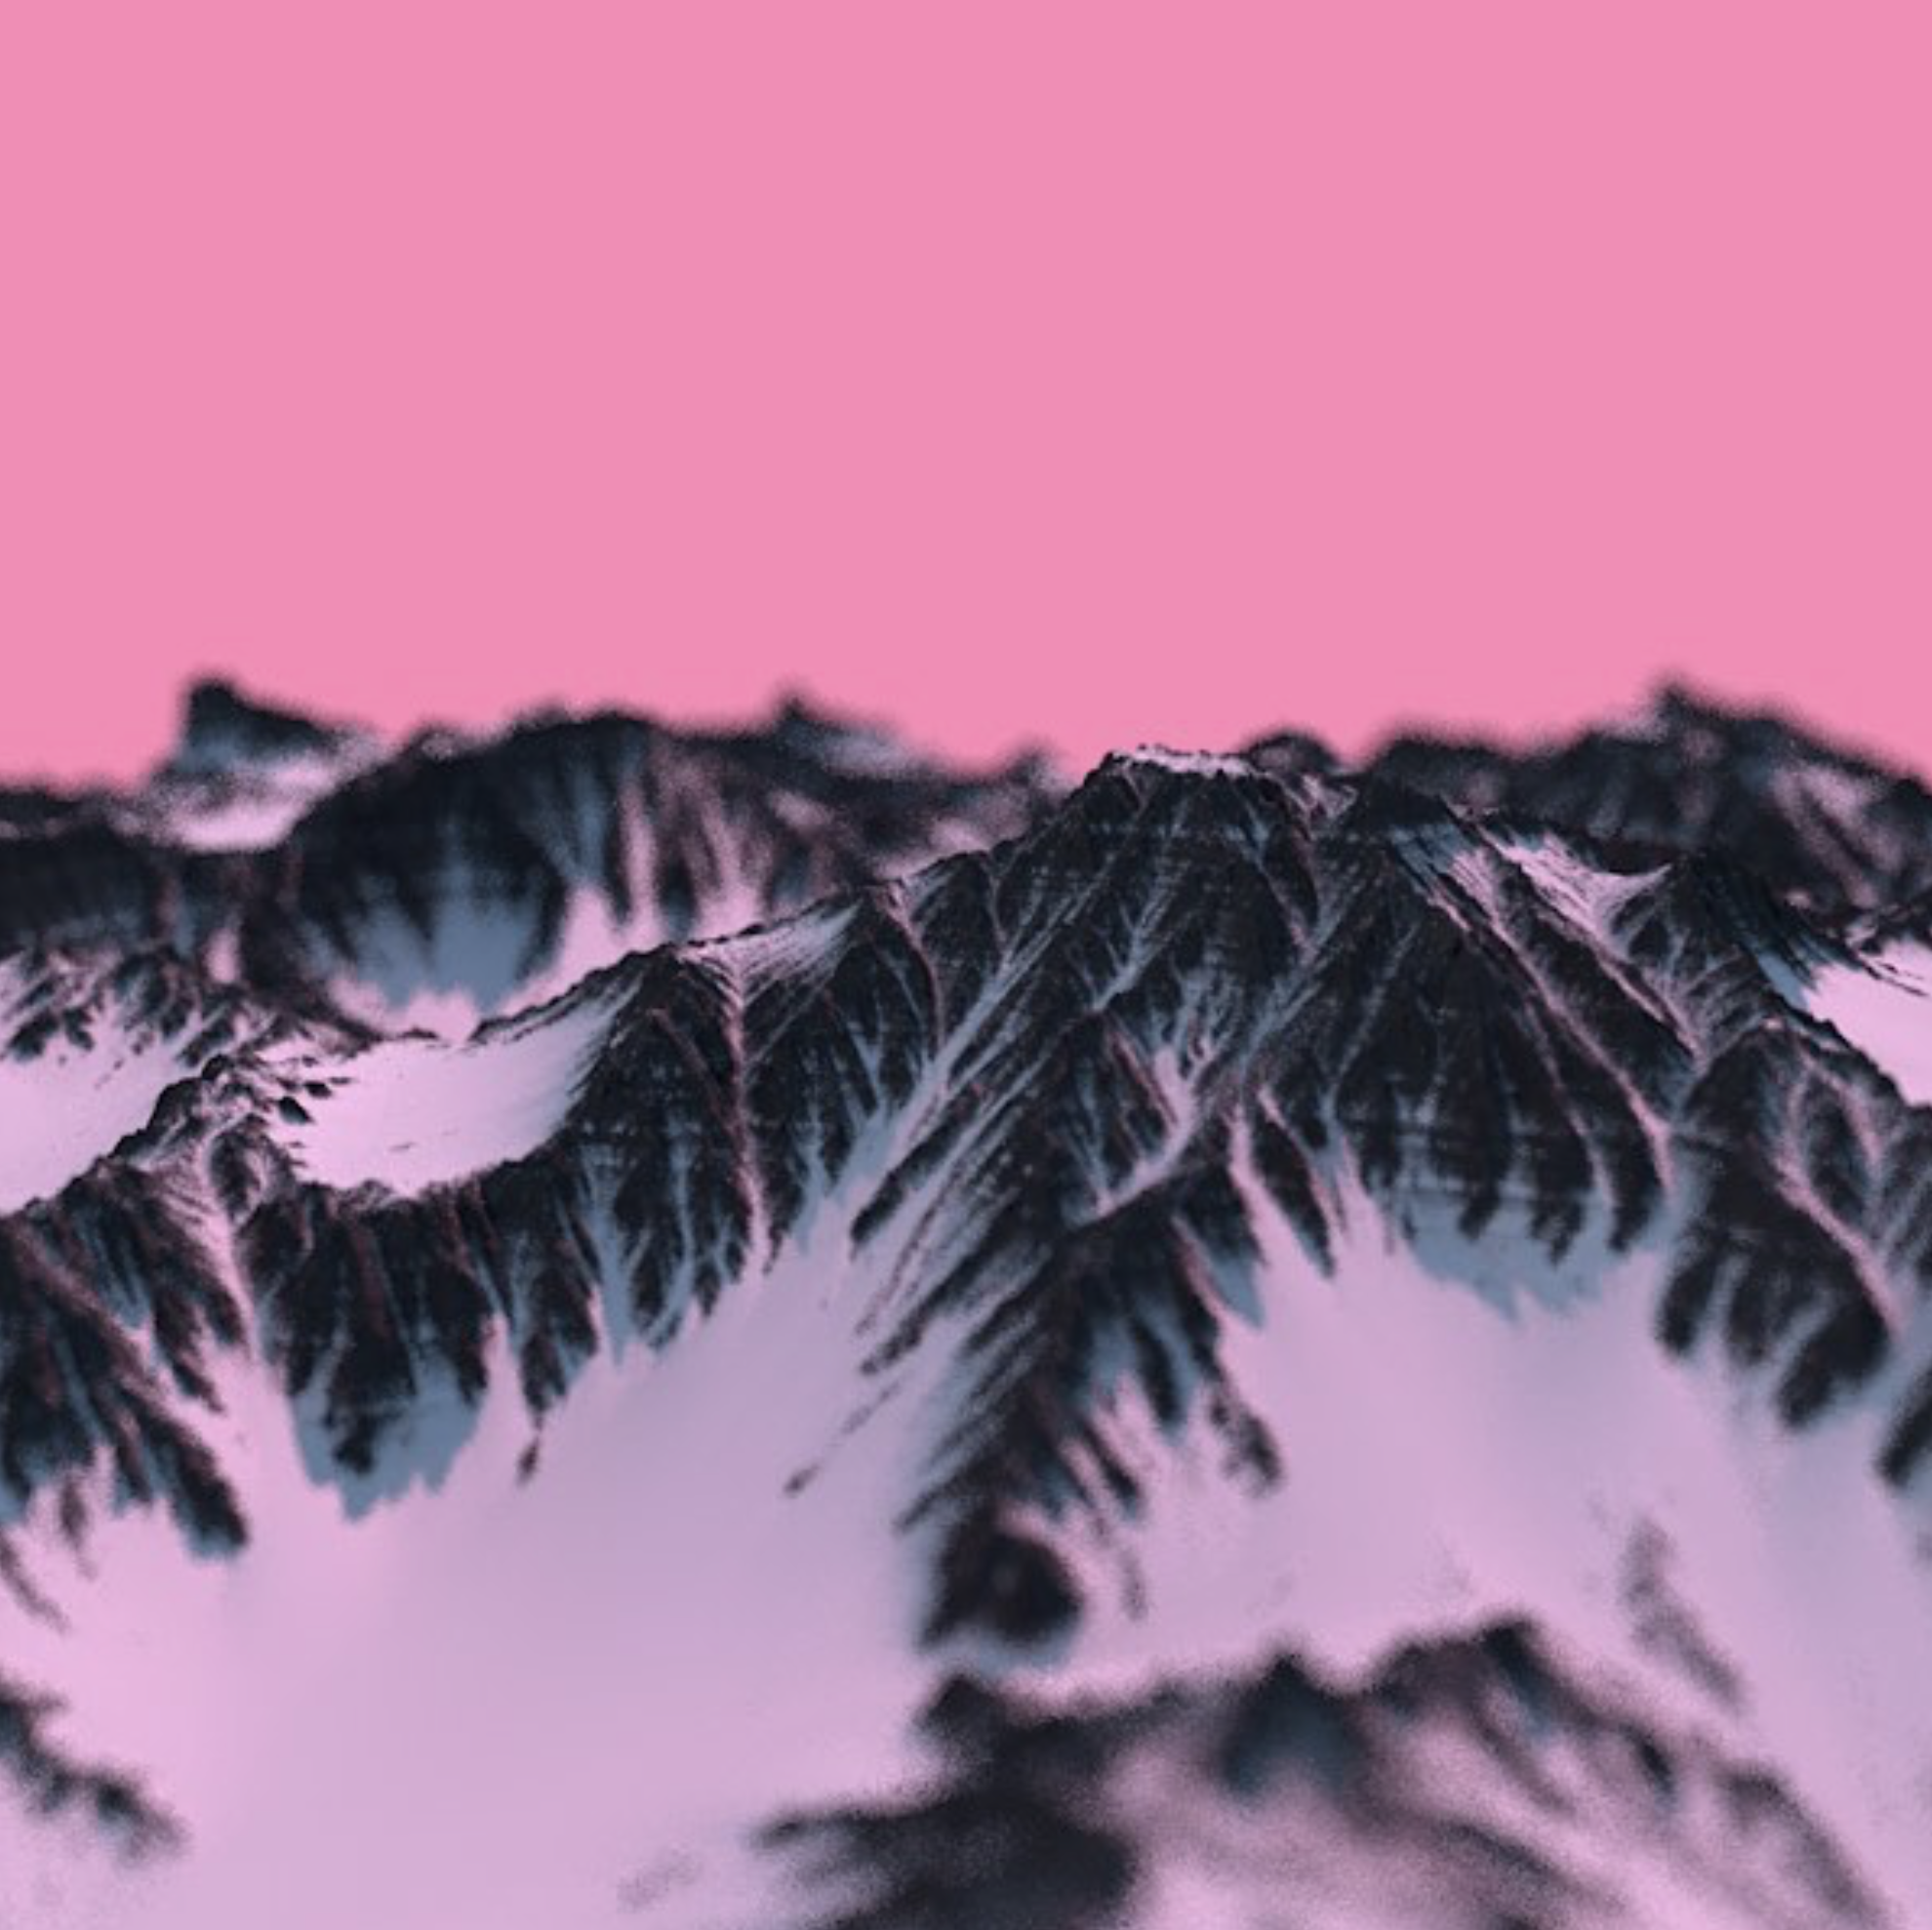 3D render of a snowy mountain range. the camera focus gives the effect that the mountain is small, like it's part of a toy set. the sky is solid pink, giving an alien yet warm feel to the image.